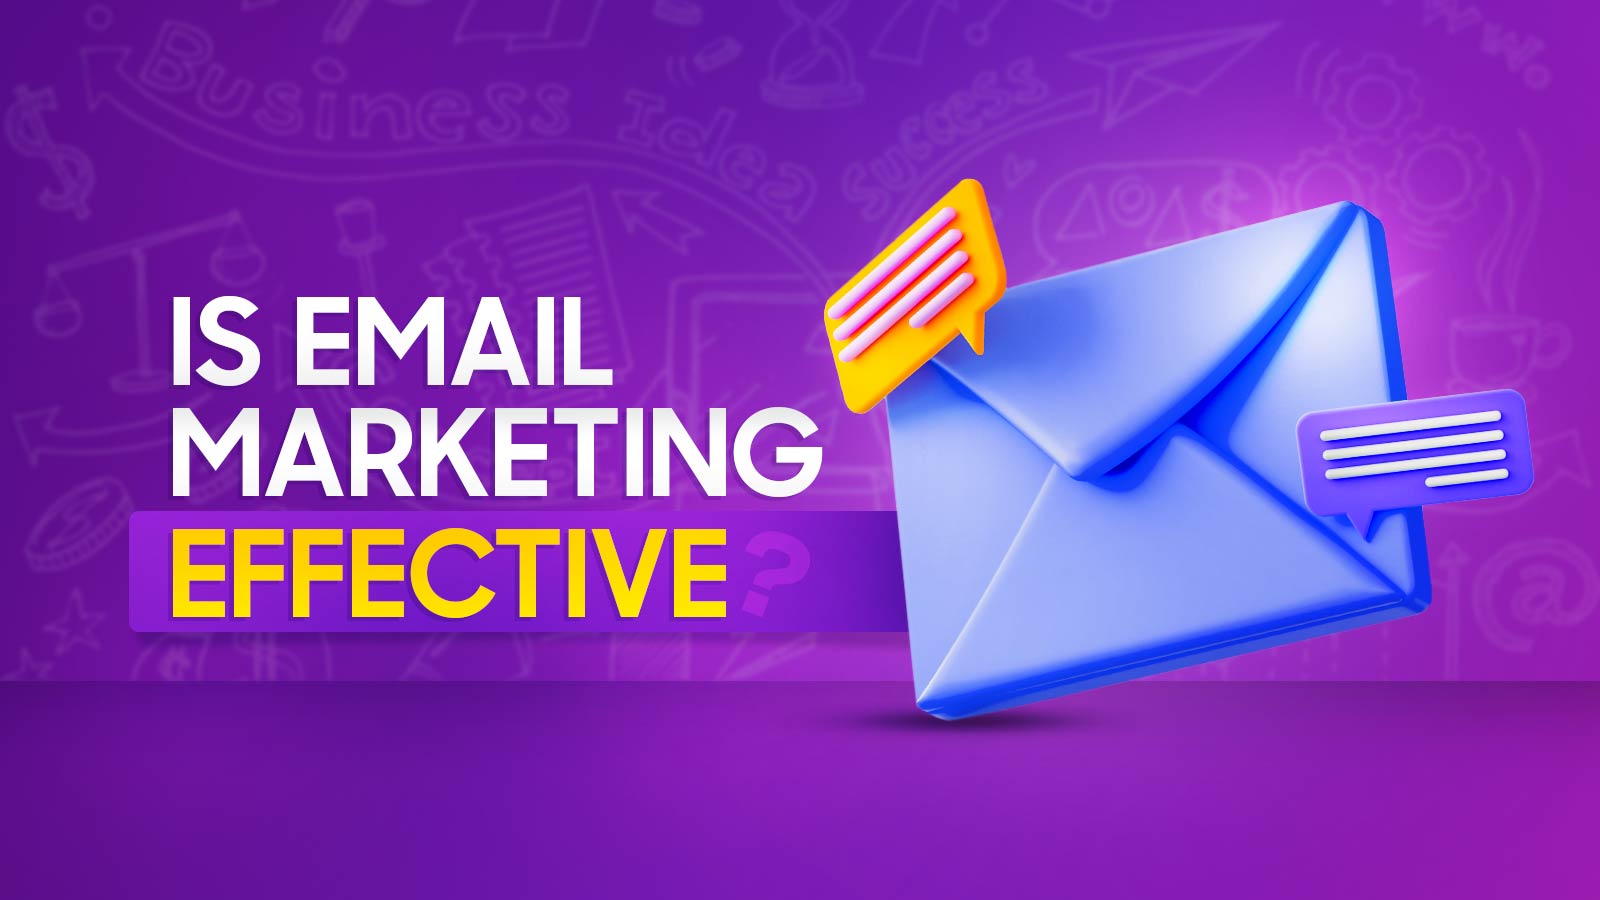 9 Key Reasons Why Is Email Marketing Effective